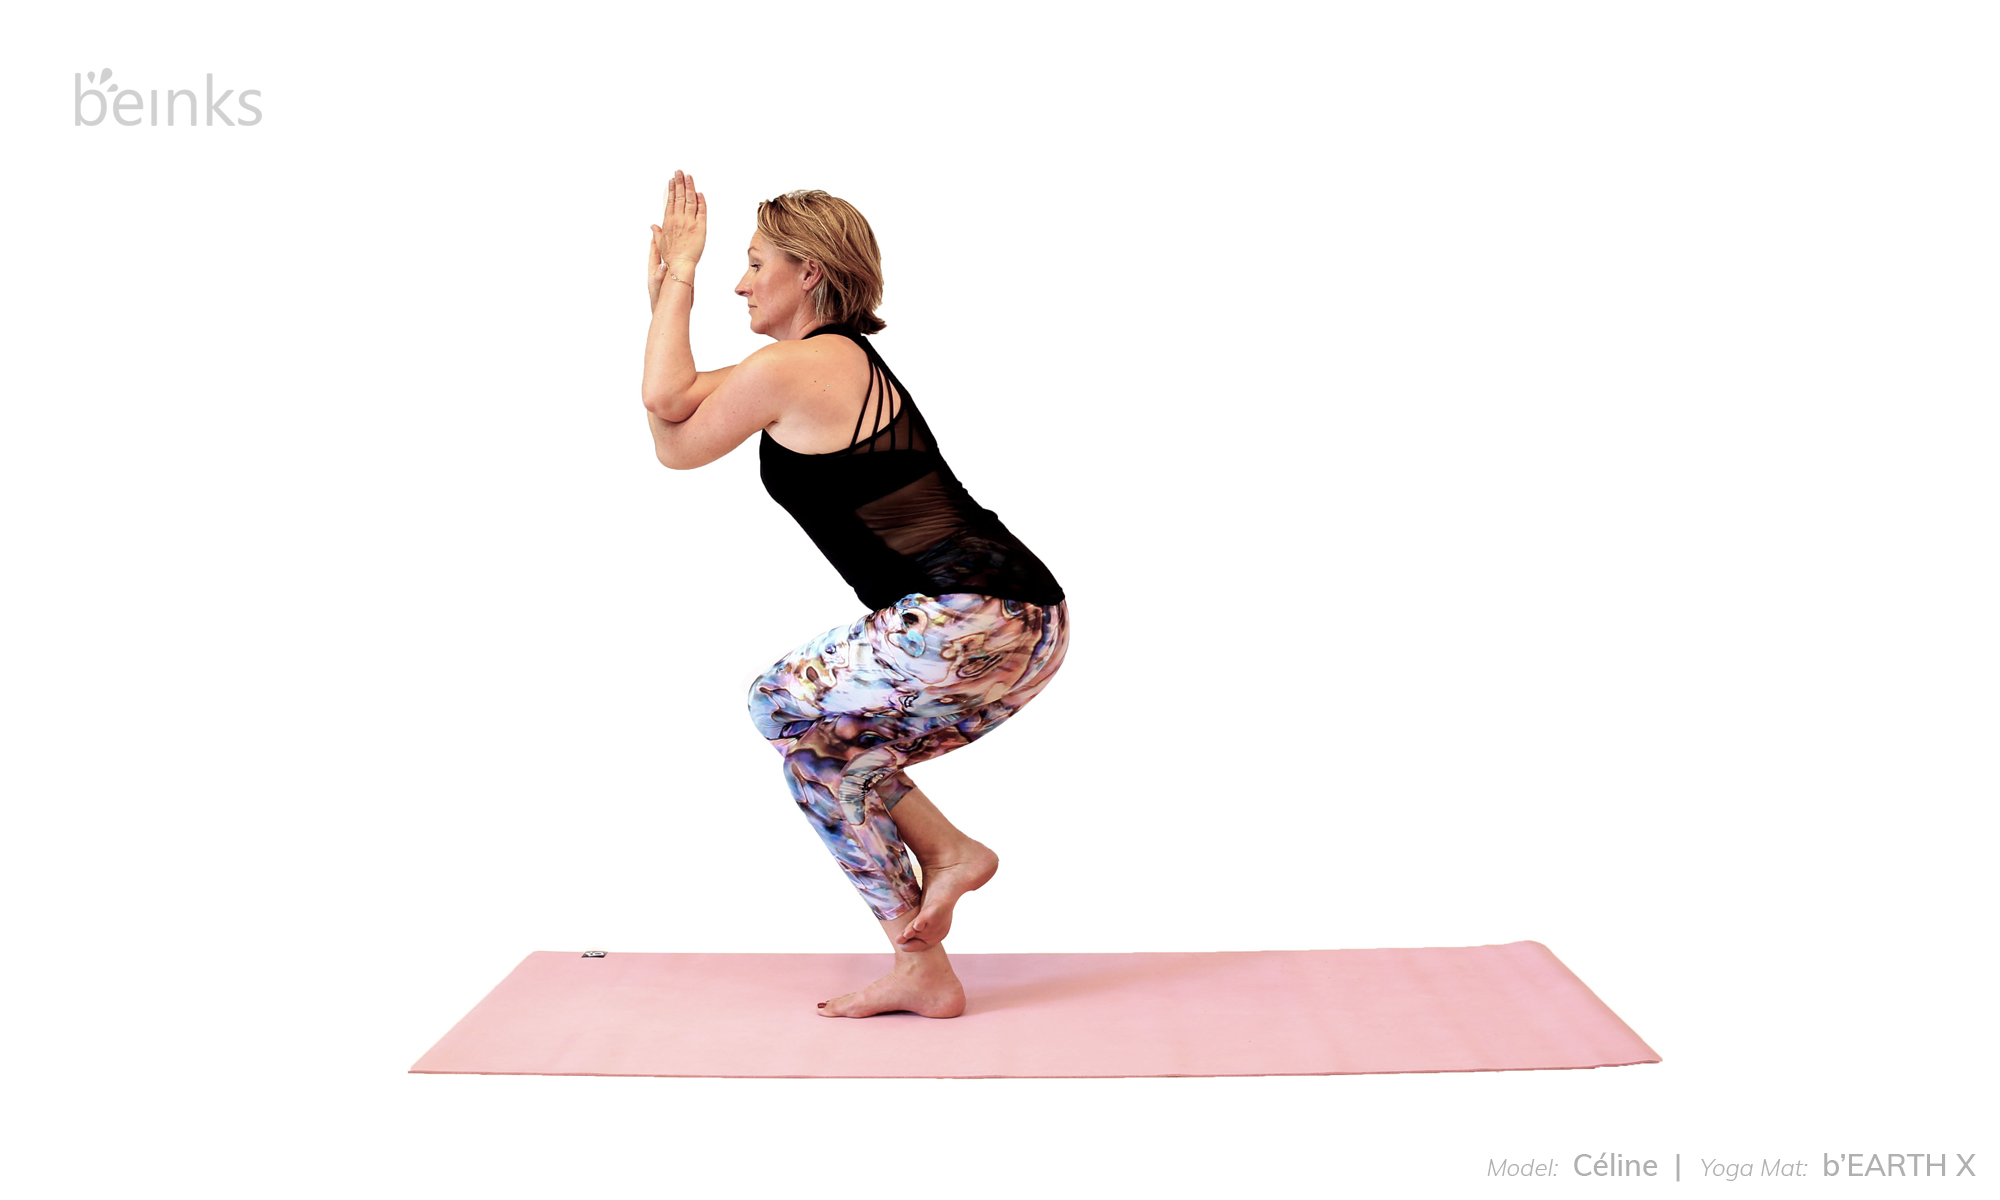 3 Yoga Poses to Fix That Office Ache | Sierra Blog